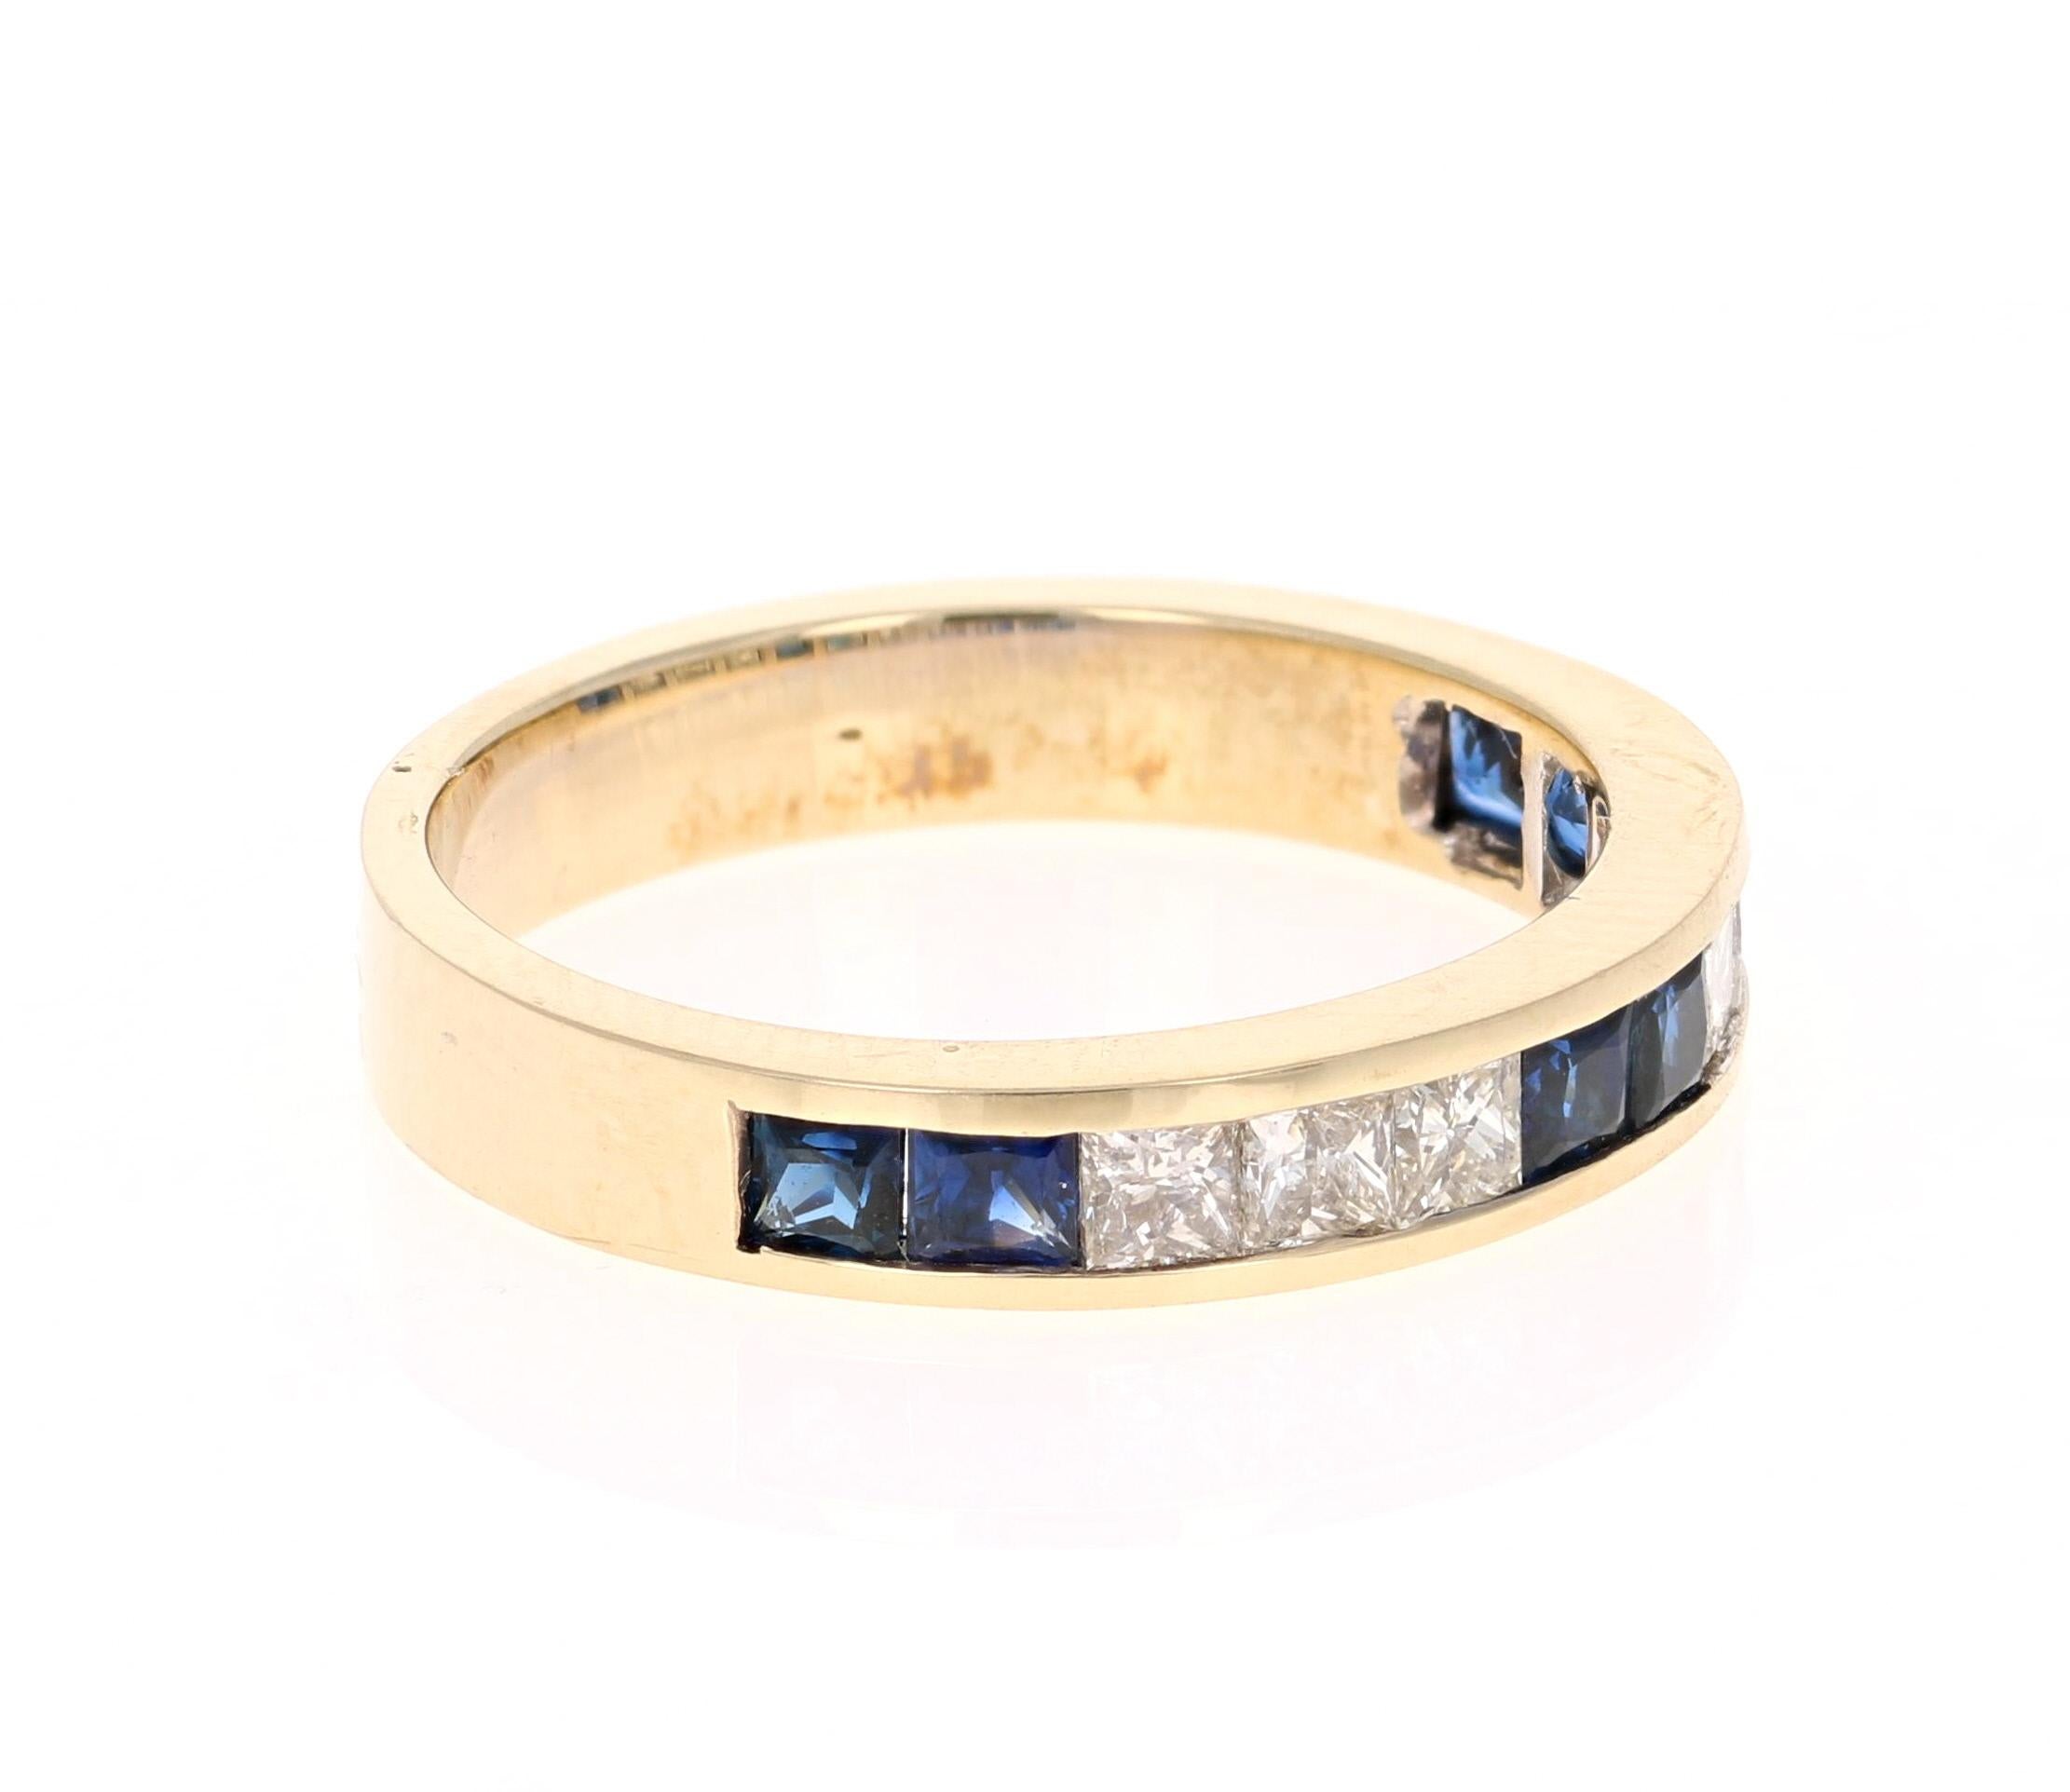 Charming Sapphire & Diamond Band!

This band has 6 Blue Square Cut Sapphires weighing 0.73 Carats and 6 Princess Cut Diamonds weighing 0.53 Carats. The total carat weight of the band is 1.26 Carats. The thickness of the band is 4 mm. 

The ring is